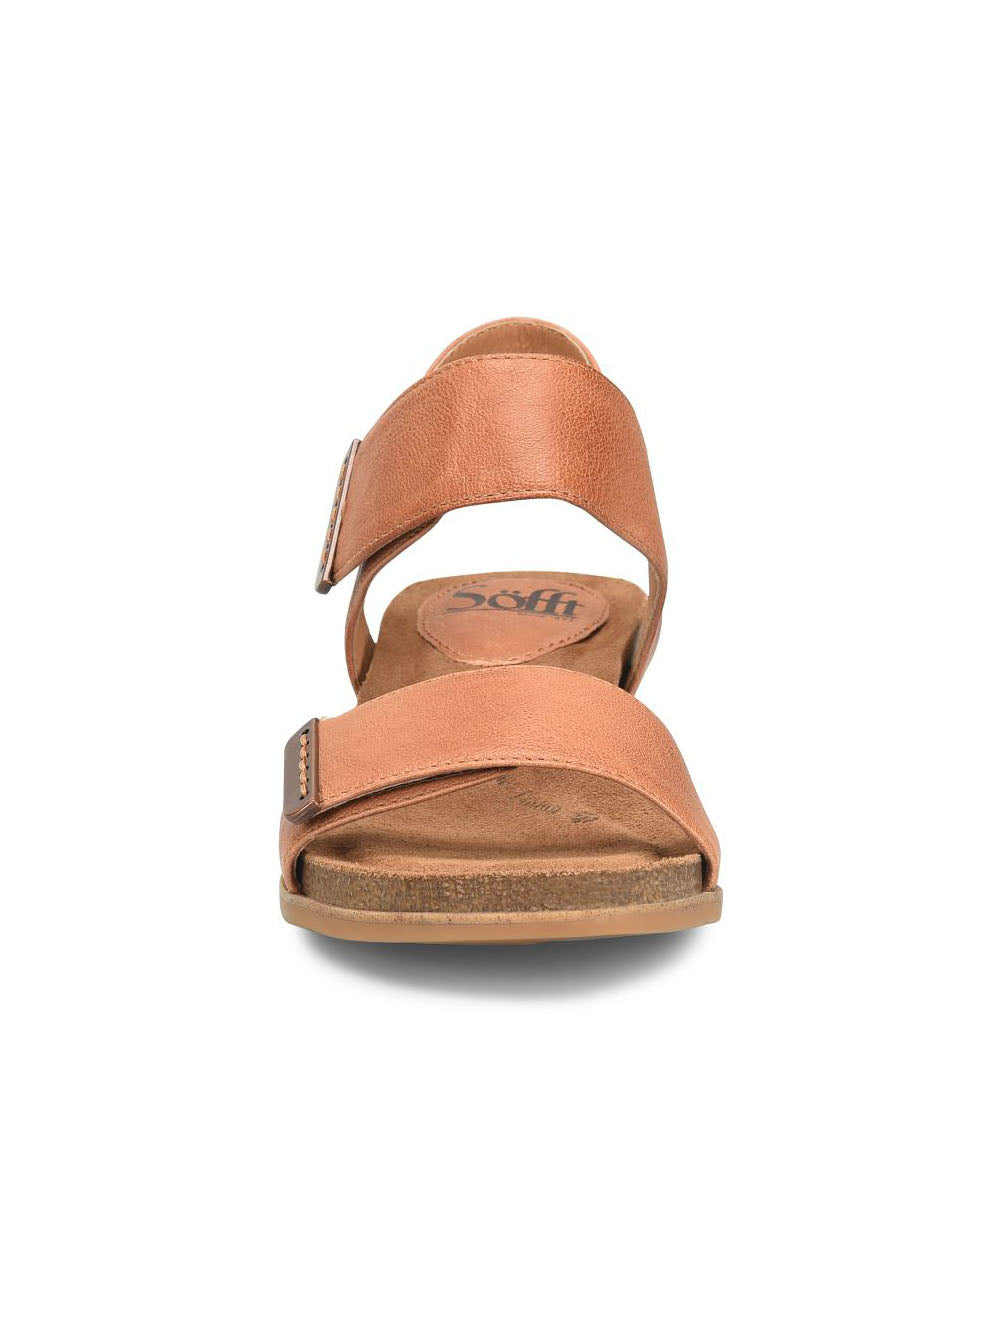 sofft shoes verdi ii strap wedge sandals in luggage tan